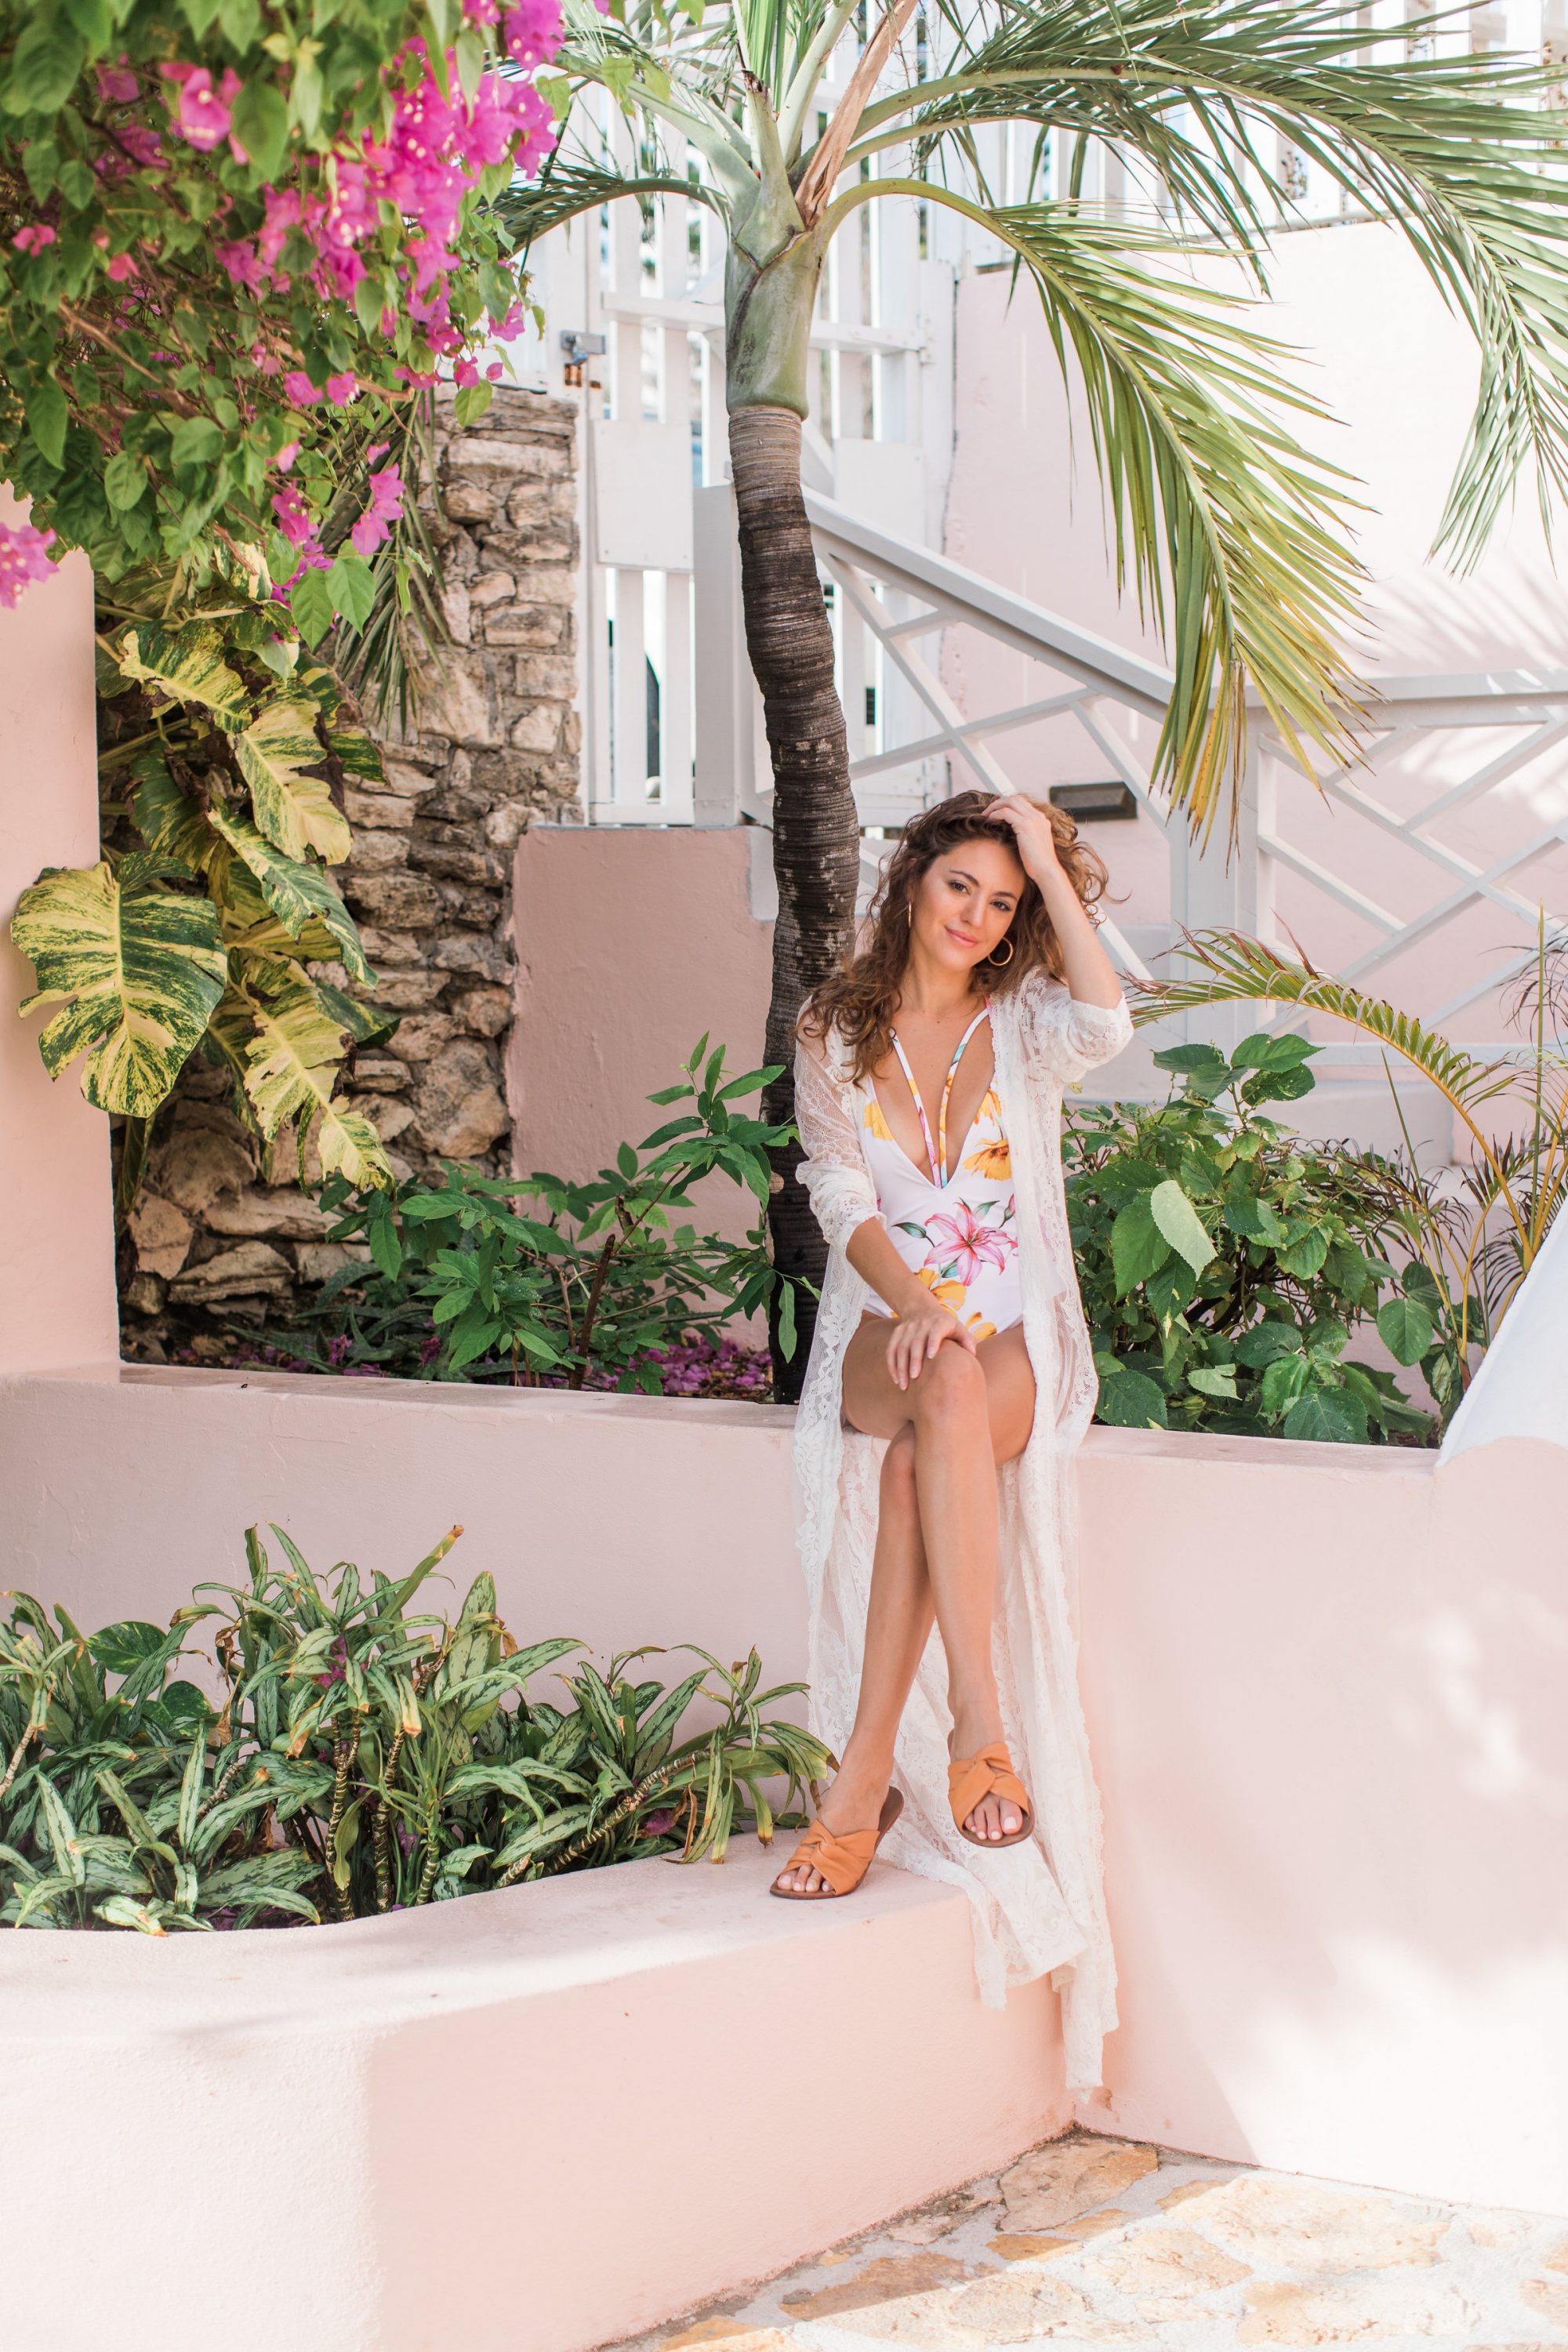 peace n plenty, peace and plenty, where to stay in exuma, where to stay in georgetown exuma, the bahamas, forever21 Strappy Floral One-Piece Swimsuit, asos Missguided Premium Lace Beach Kimono, summer outfit ideas, resort wear, beach outfit ideas, what to wear on a beach vacation, what to wear on a tropical location